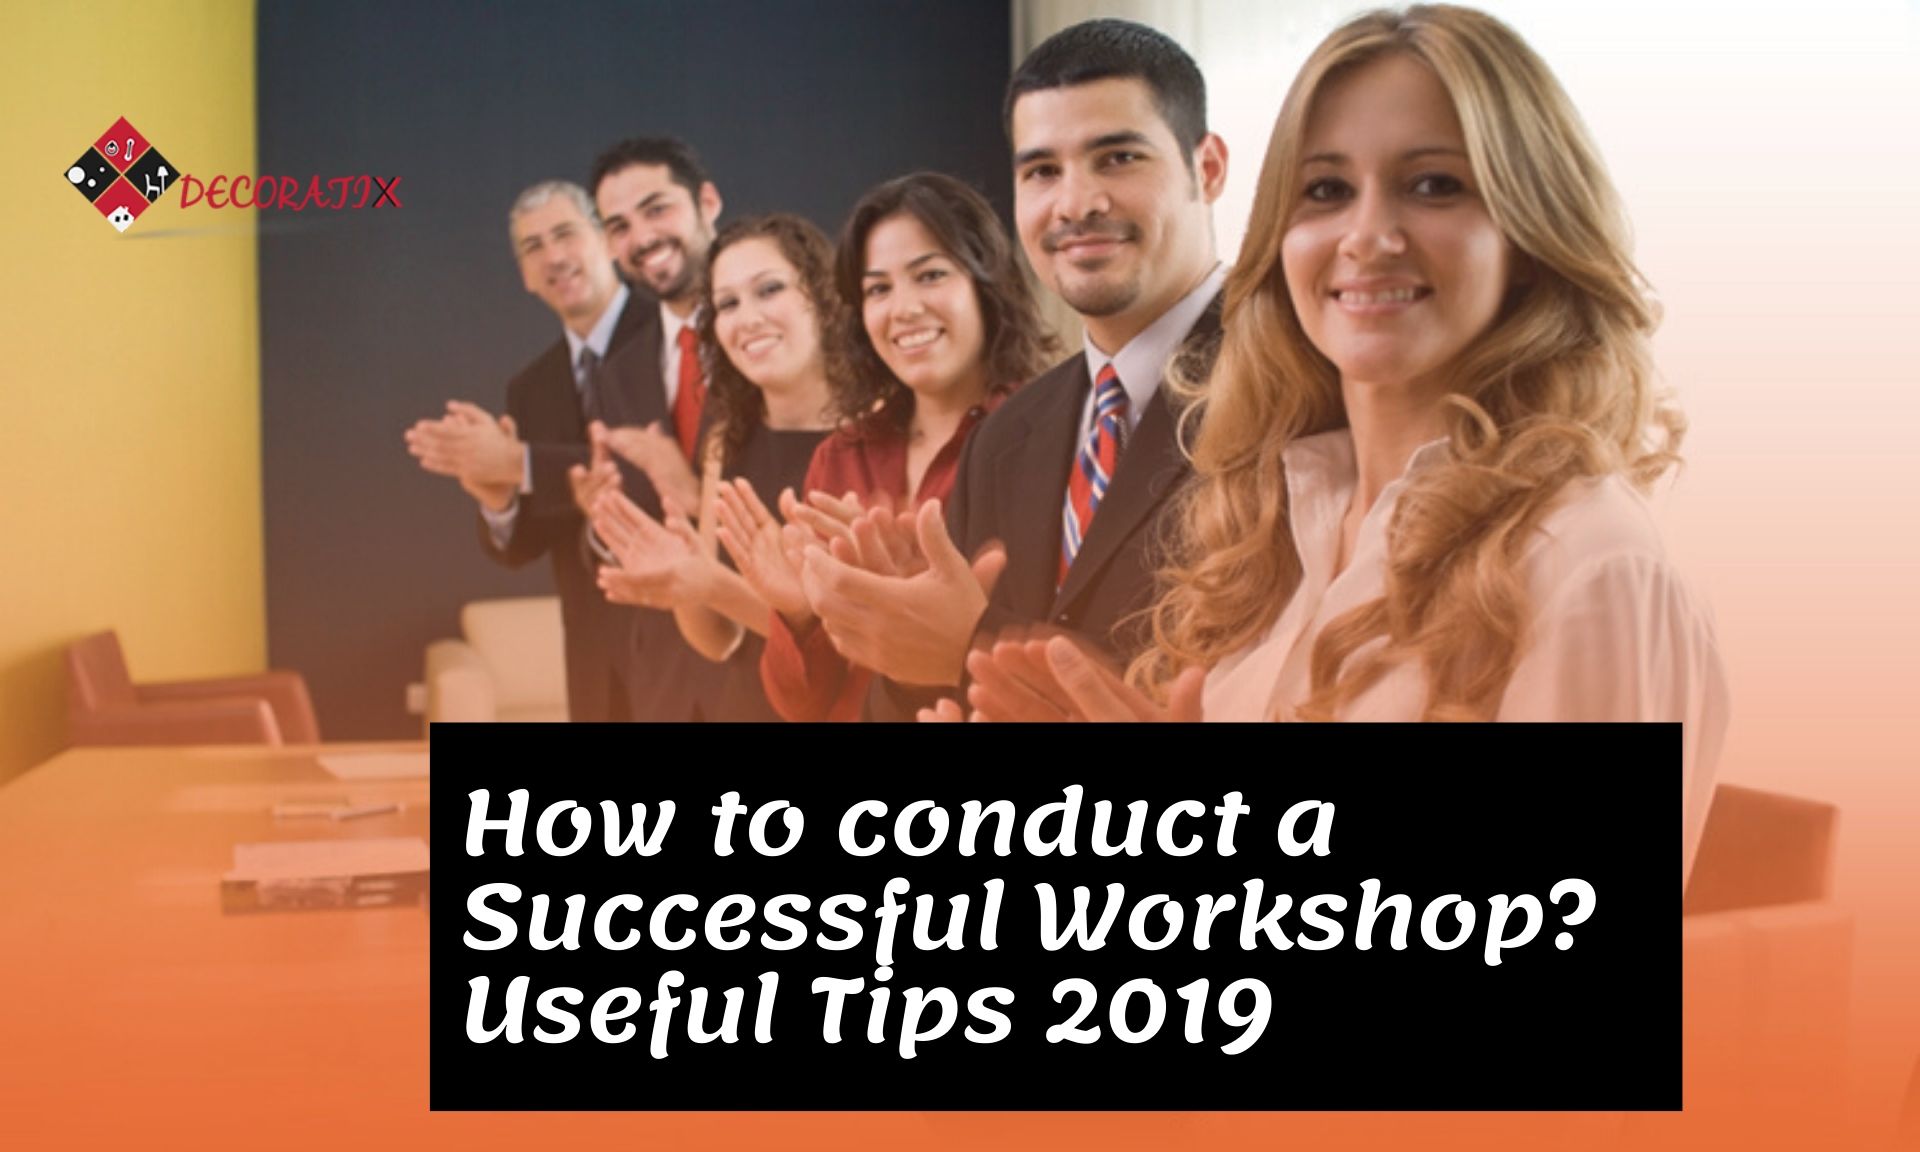 How to conduct a Successful Workshop? Useful Tips 2019